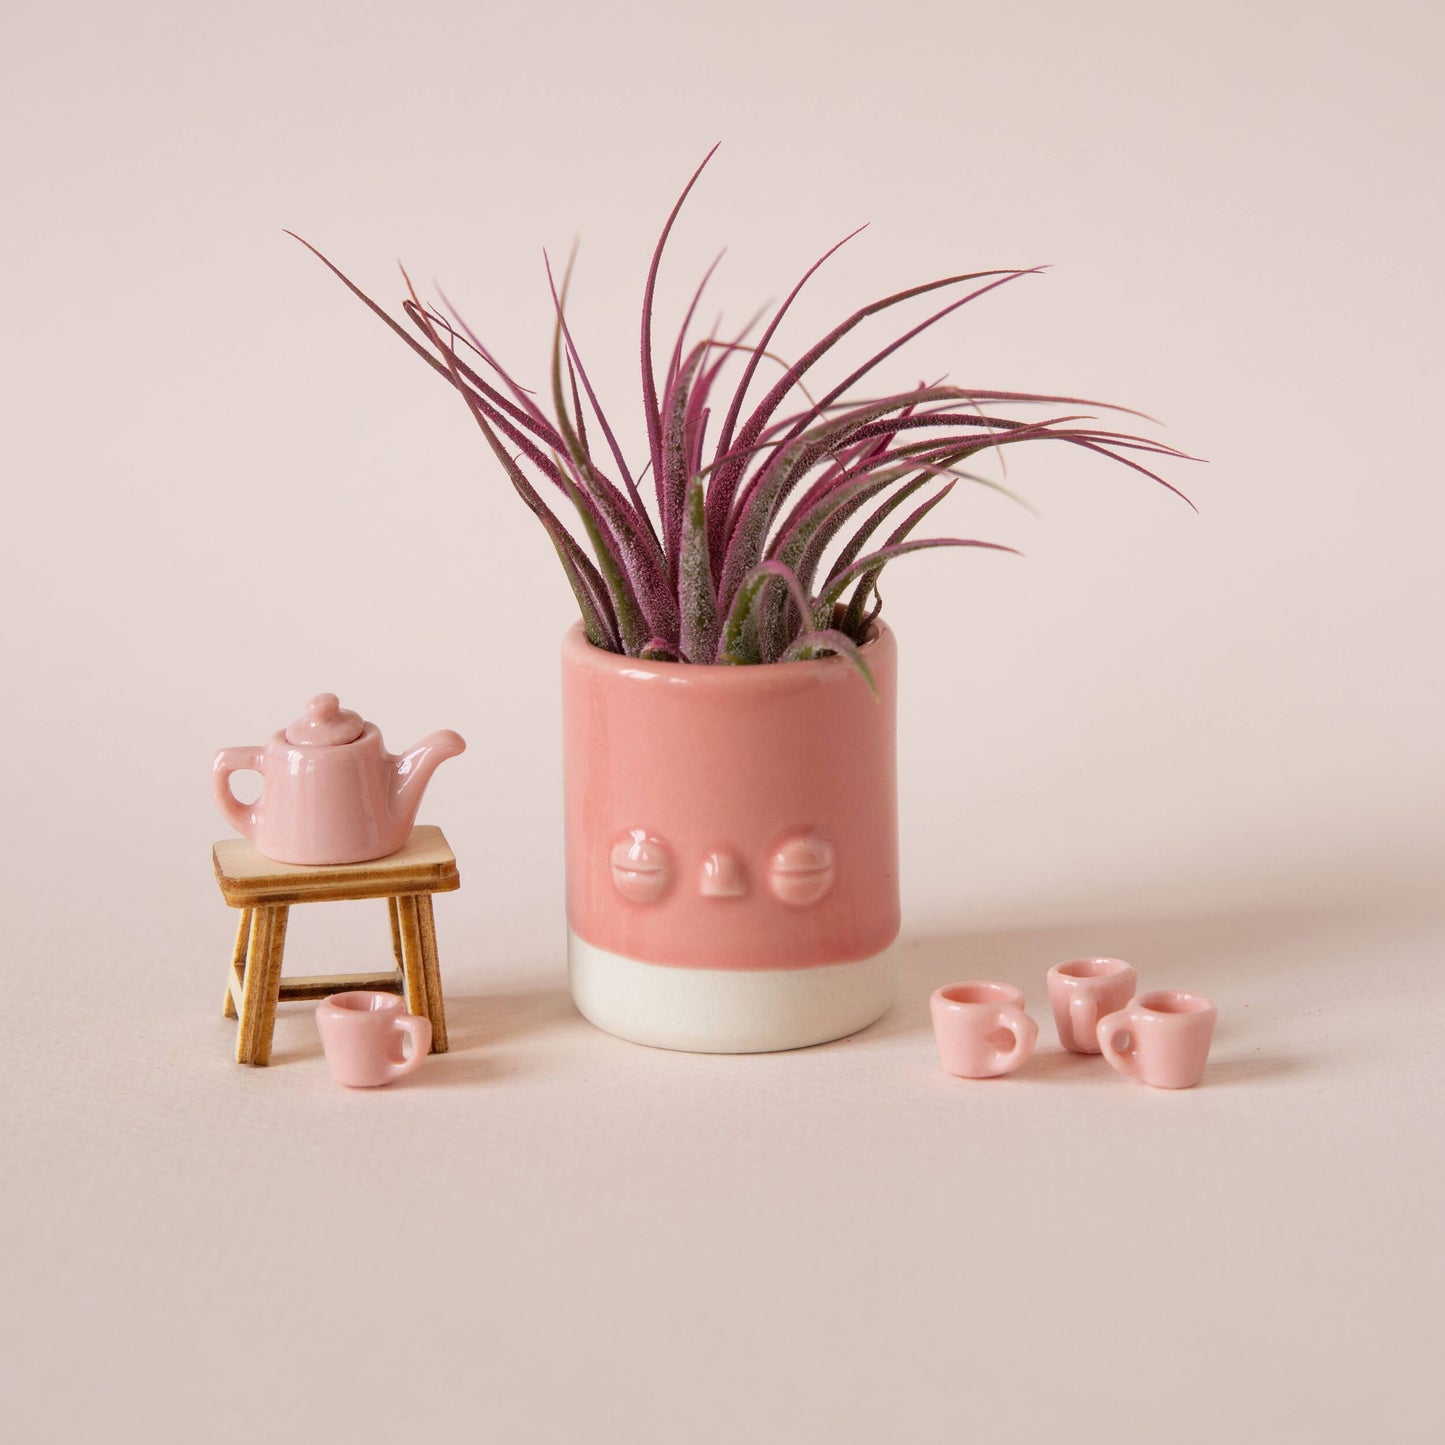 Friend Assembly: Mini Faceplanters